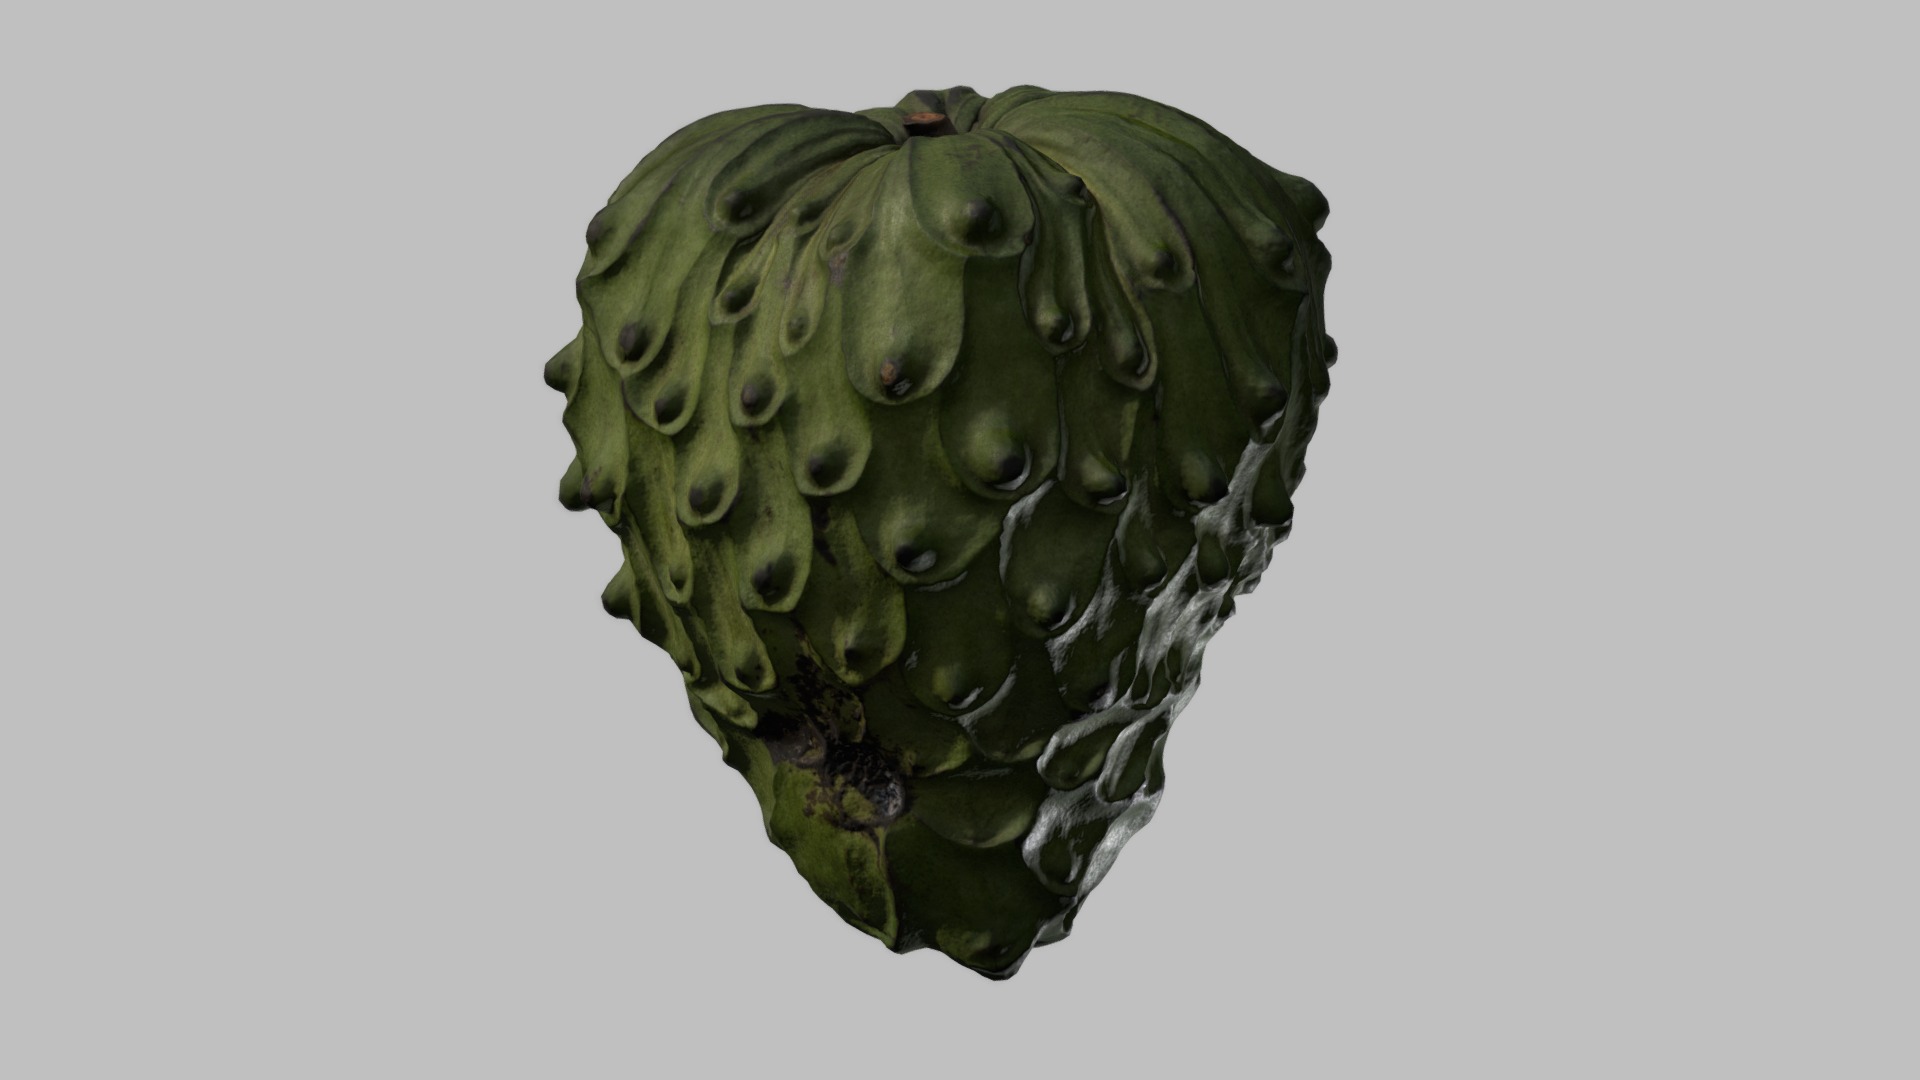 3D model Photogrammetry Cherimoya Fruit - This is a 3D model of the Photogrammetry Cherimoya Fruit. The 3D model is about a sculpture of a head.